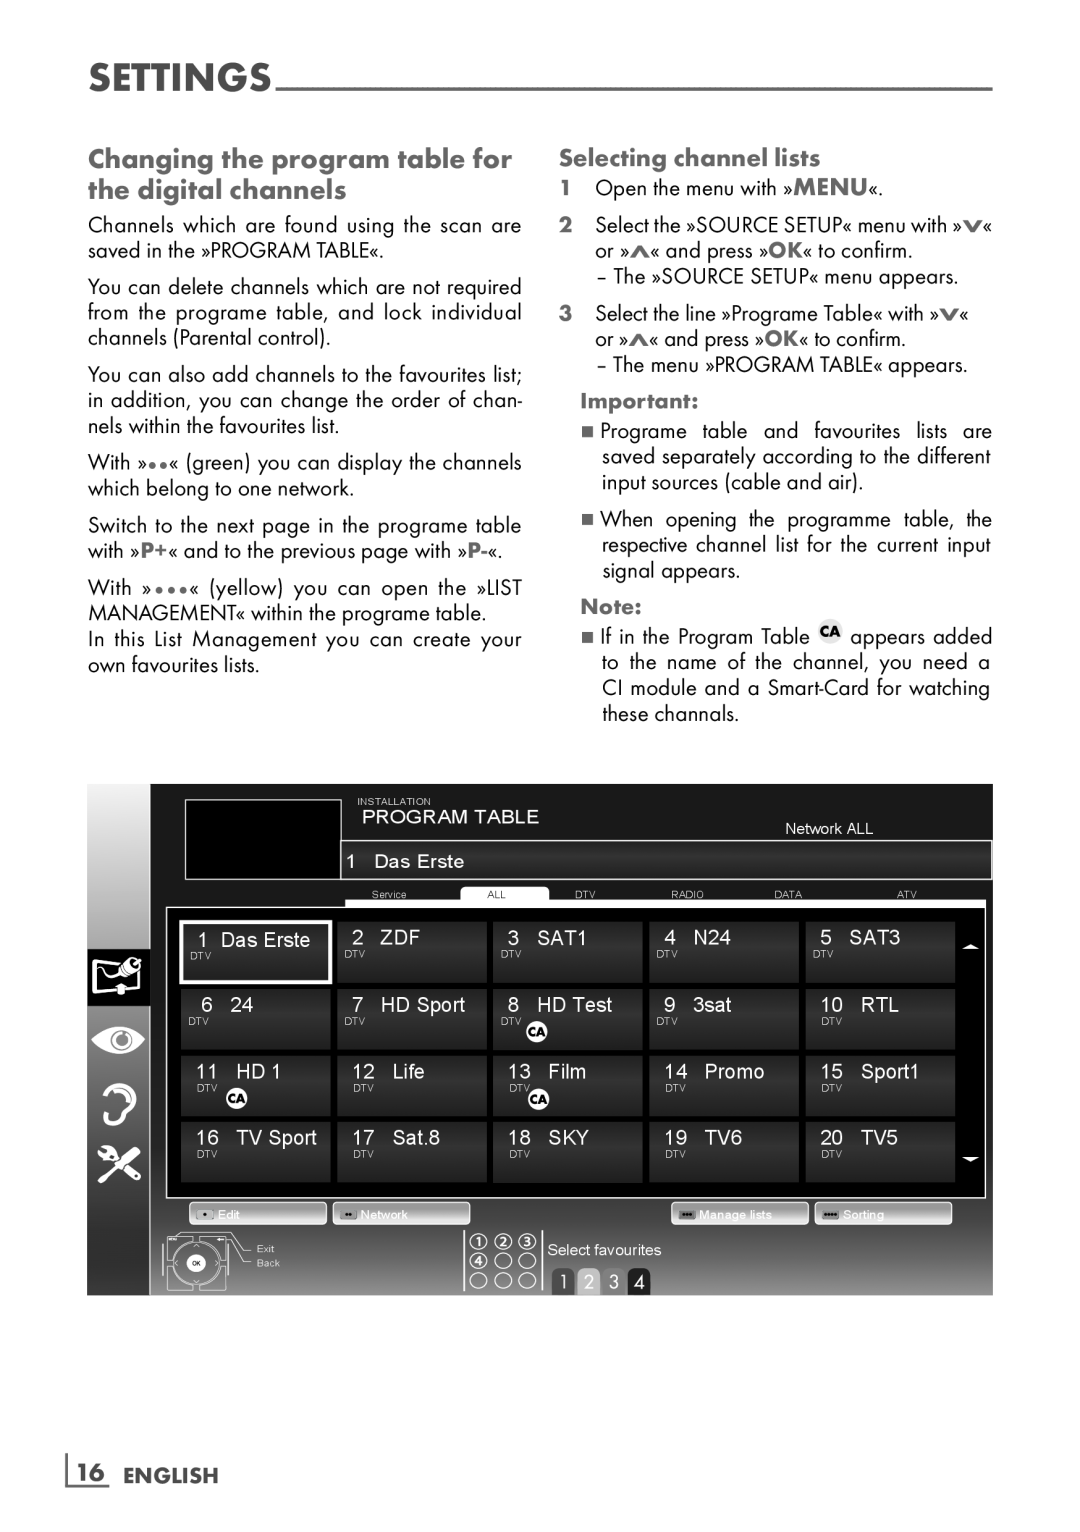 Grundig 32 VLD 4201 BF Changing the program table for the digital channels, Selecting channel lists, ­16 ENGLISH, SAT1 